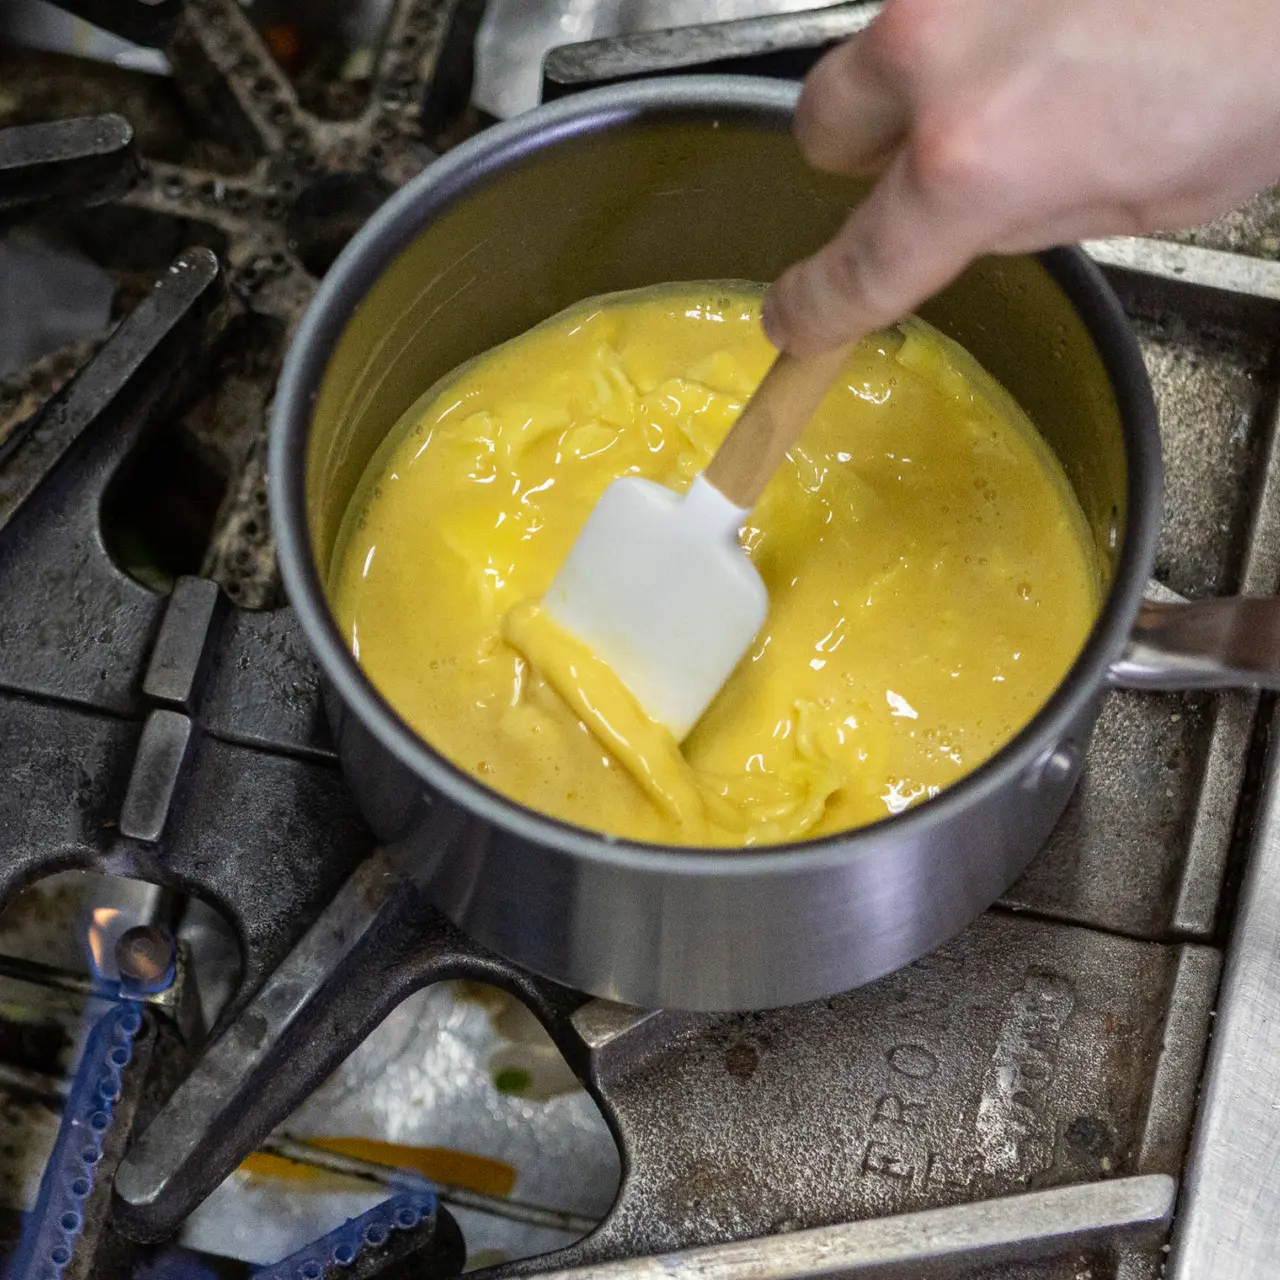 A person is stirring a thick yellow mixture in a saucepan on a stove with a white spatula.